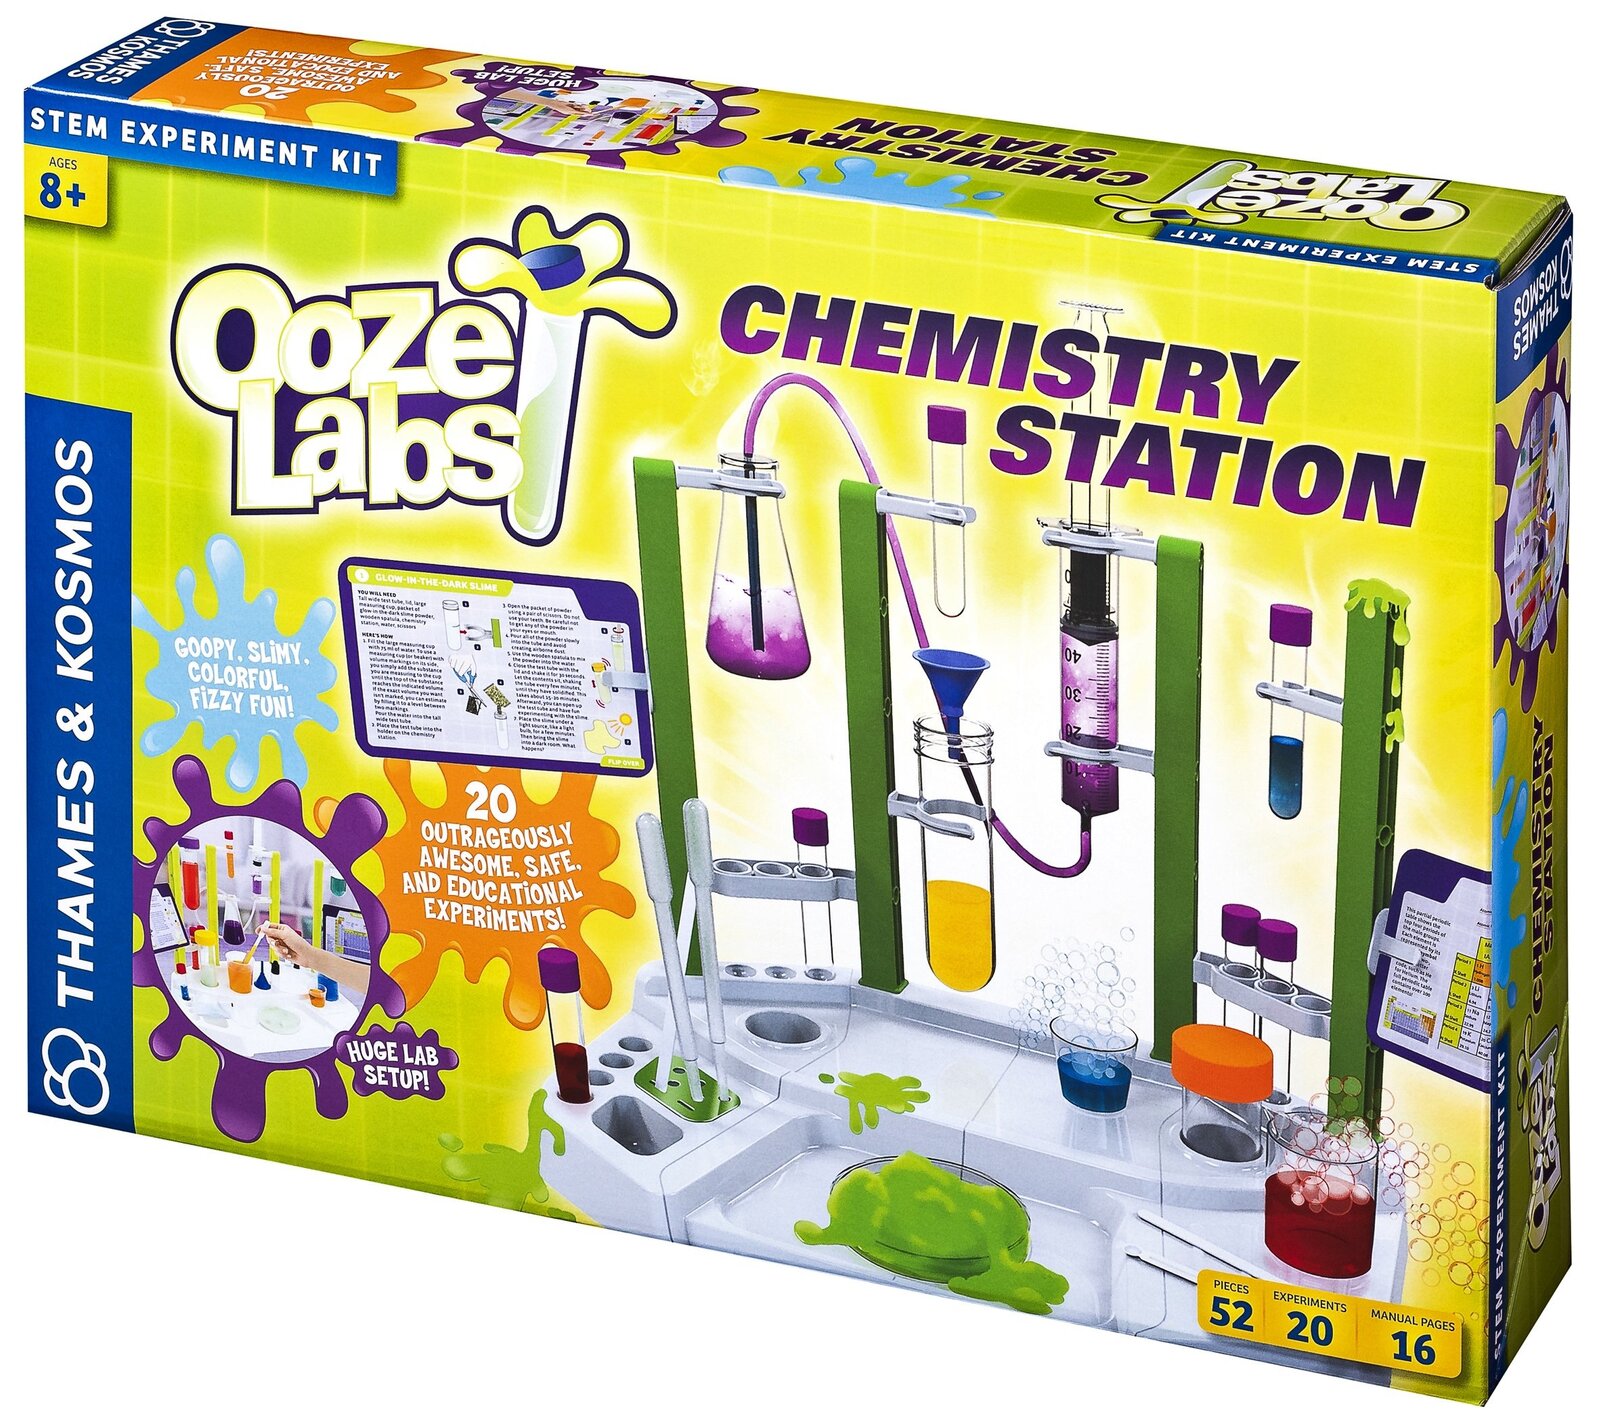 Ooze Labs Chemistry Station image